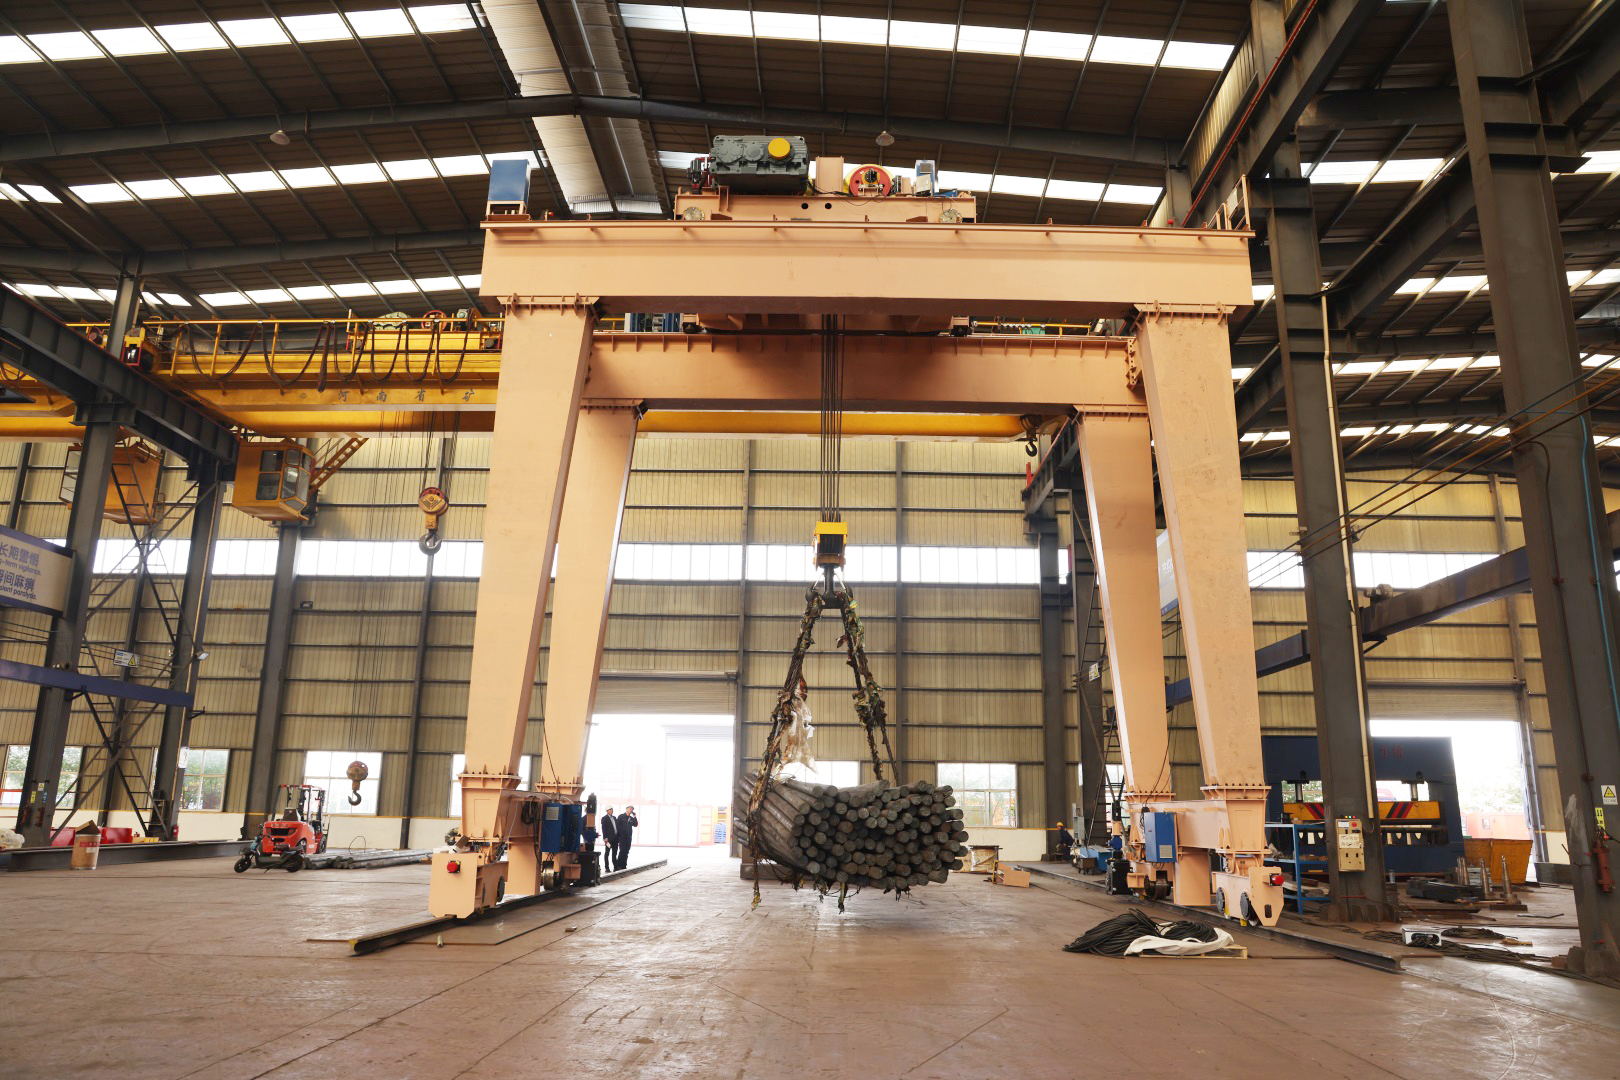 Another good news! 100 ton double girder gantry crane manufactured by Henan Mining Company for China Nuclear Power Company successfully passed factory acceptance